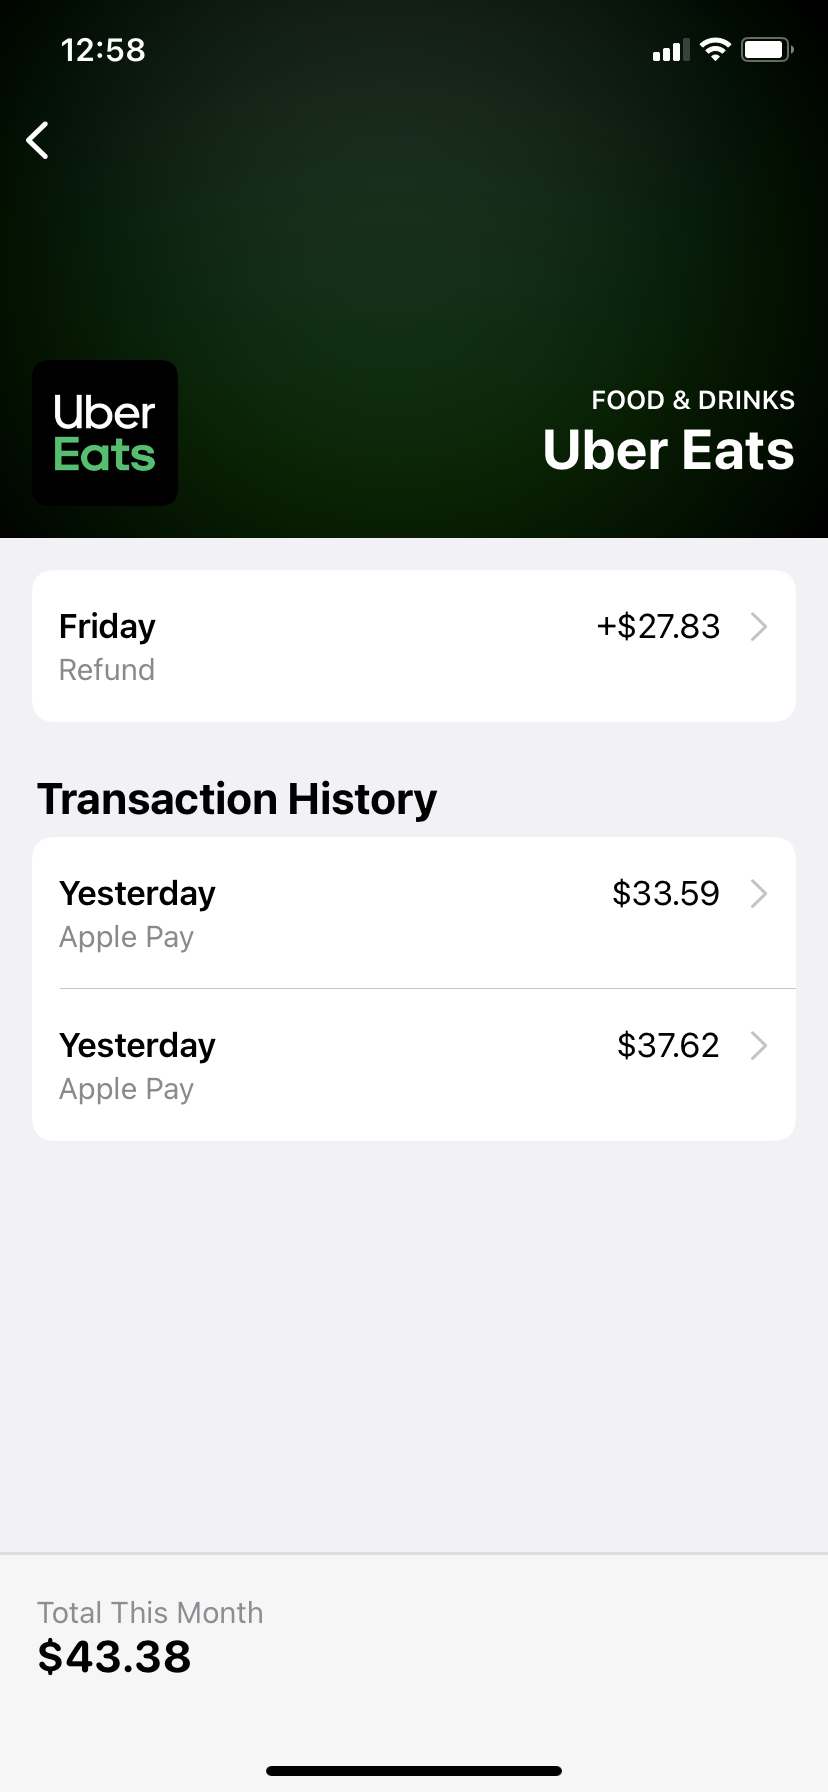 not eligible for refund - Apple Community